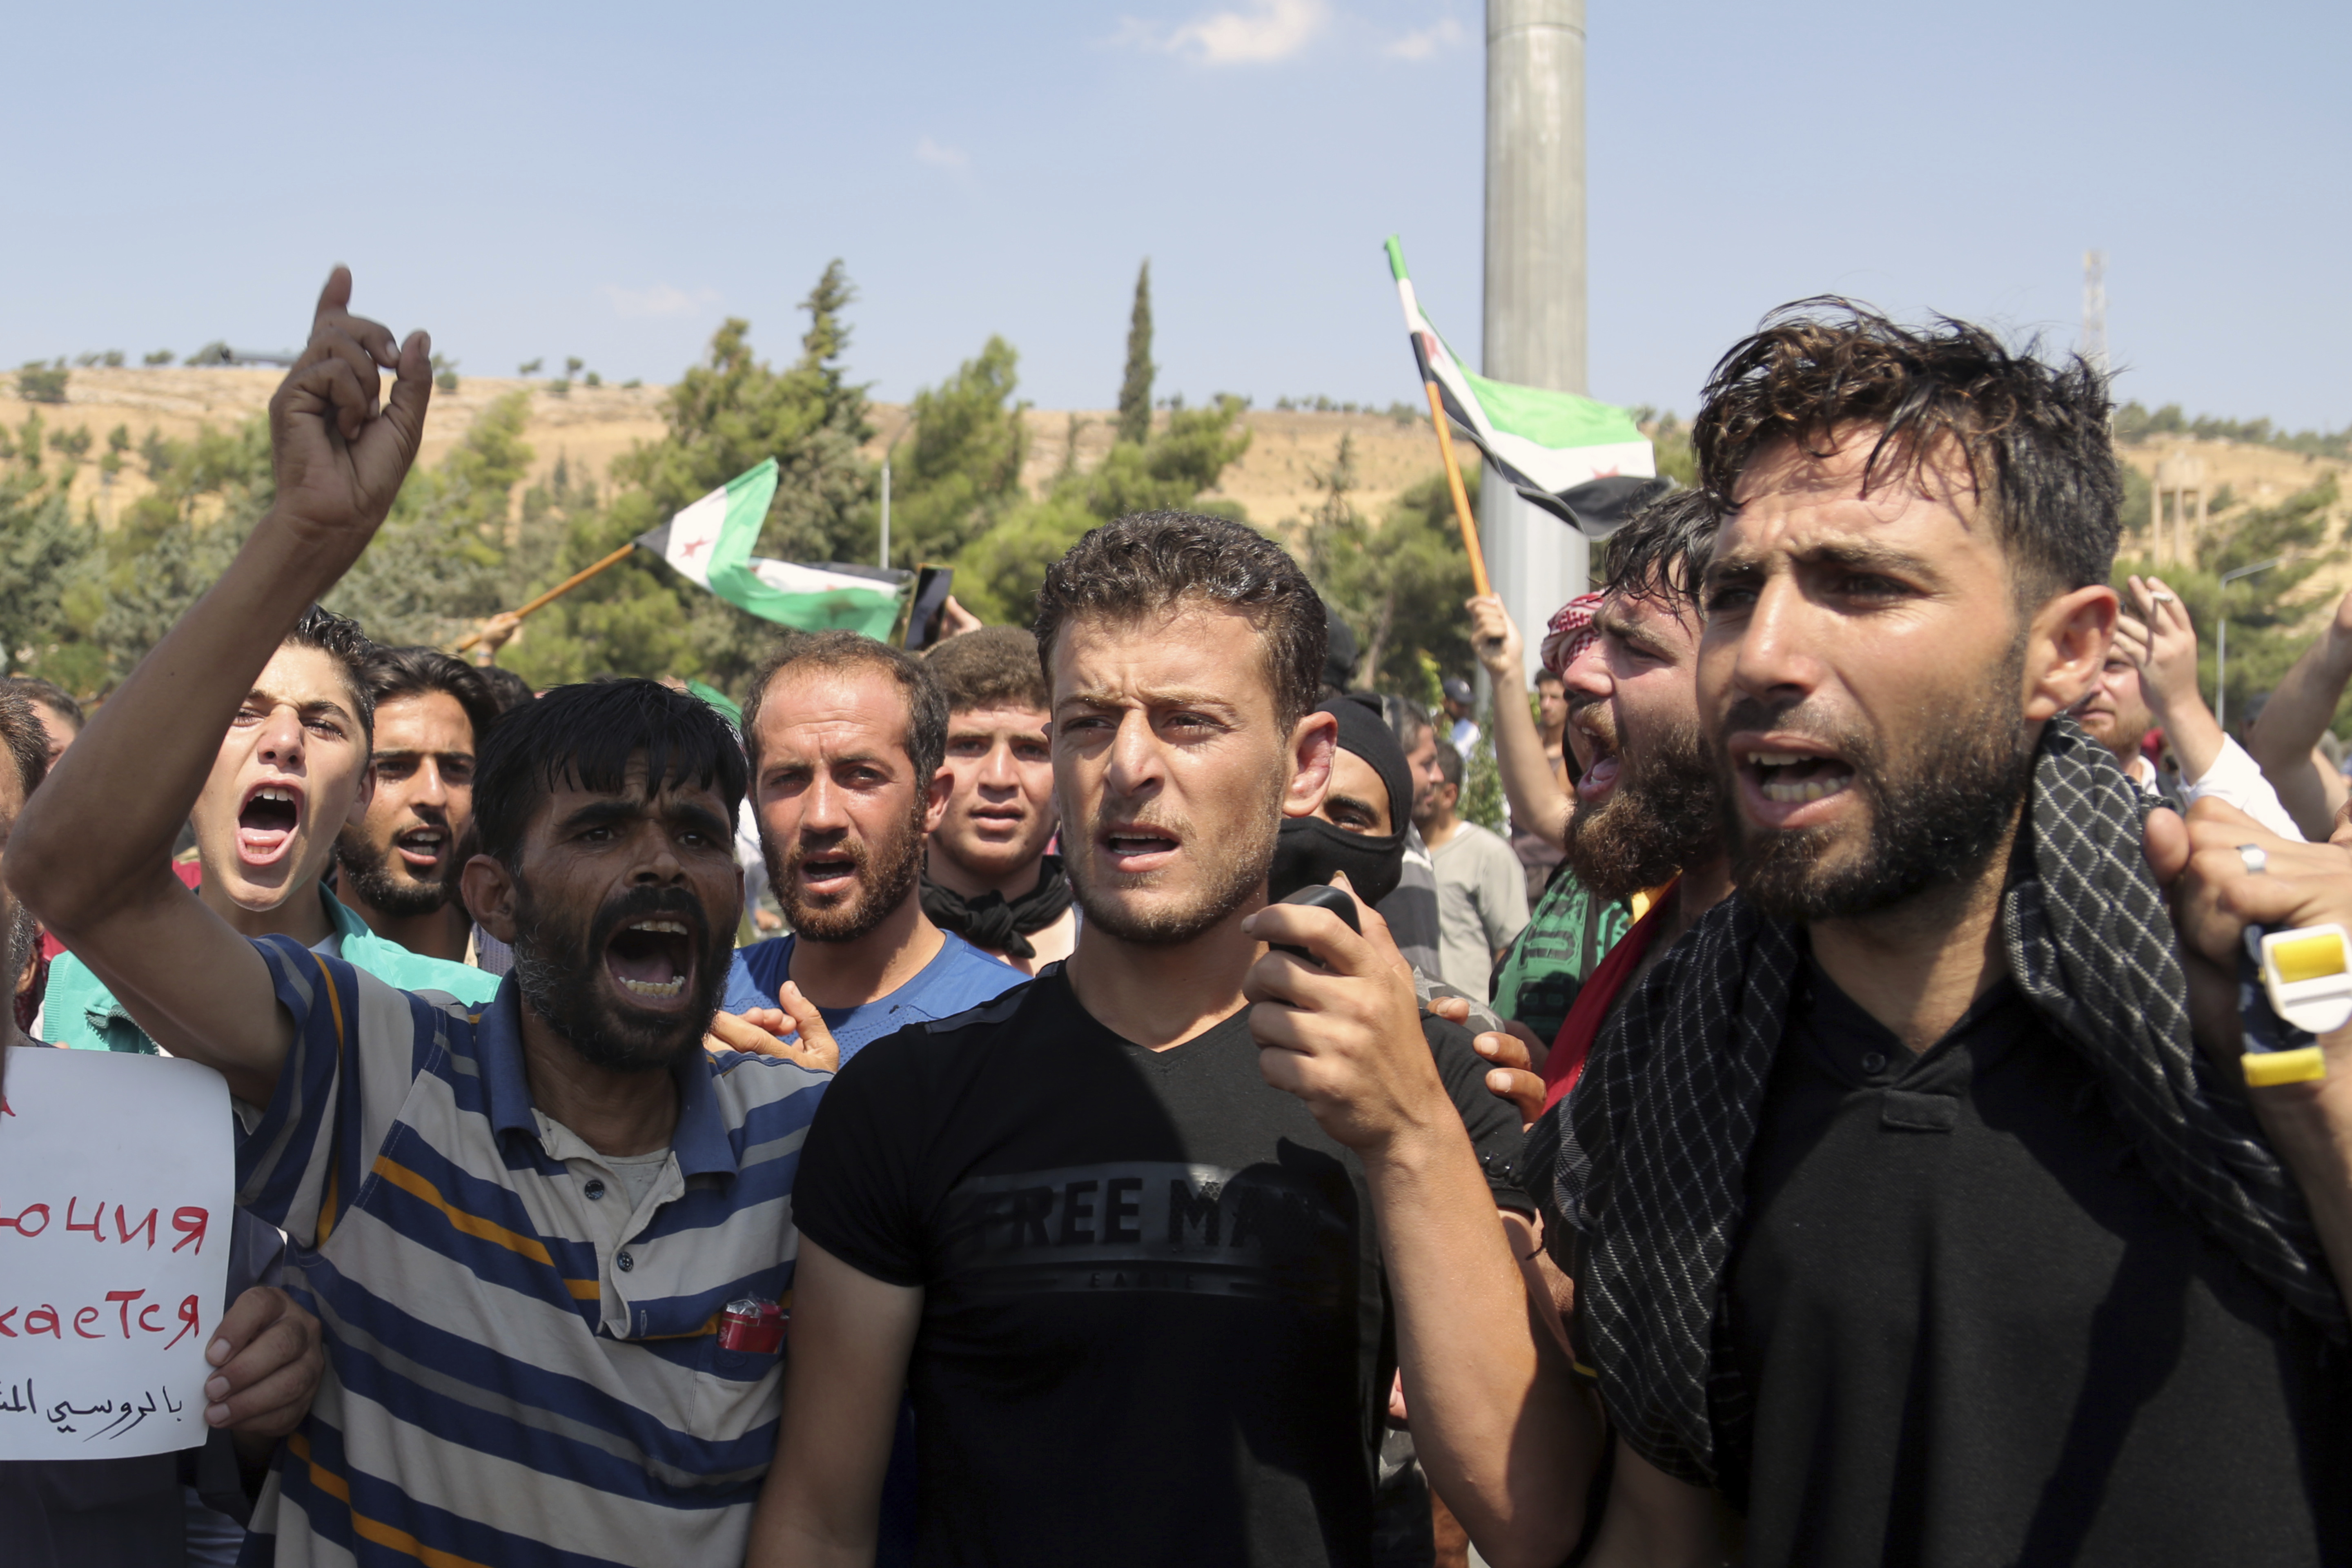 Protesters chant slogans as they hold Syrian revolutionary flags during a demonstration at the Bab al-Hawa border crossing with Turkey, Syria, Friday, Aug. 30, 2019, demanding that Ankara either open the border or end attacks by the government. Opposition activists said Turkish borders guards fired tear gas at the protesters. (AP Photo)